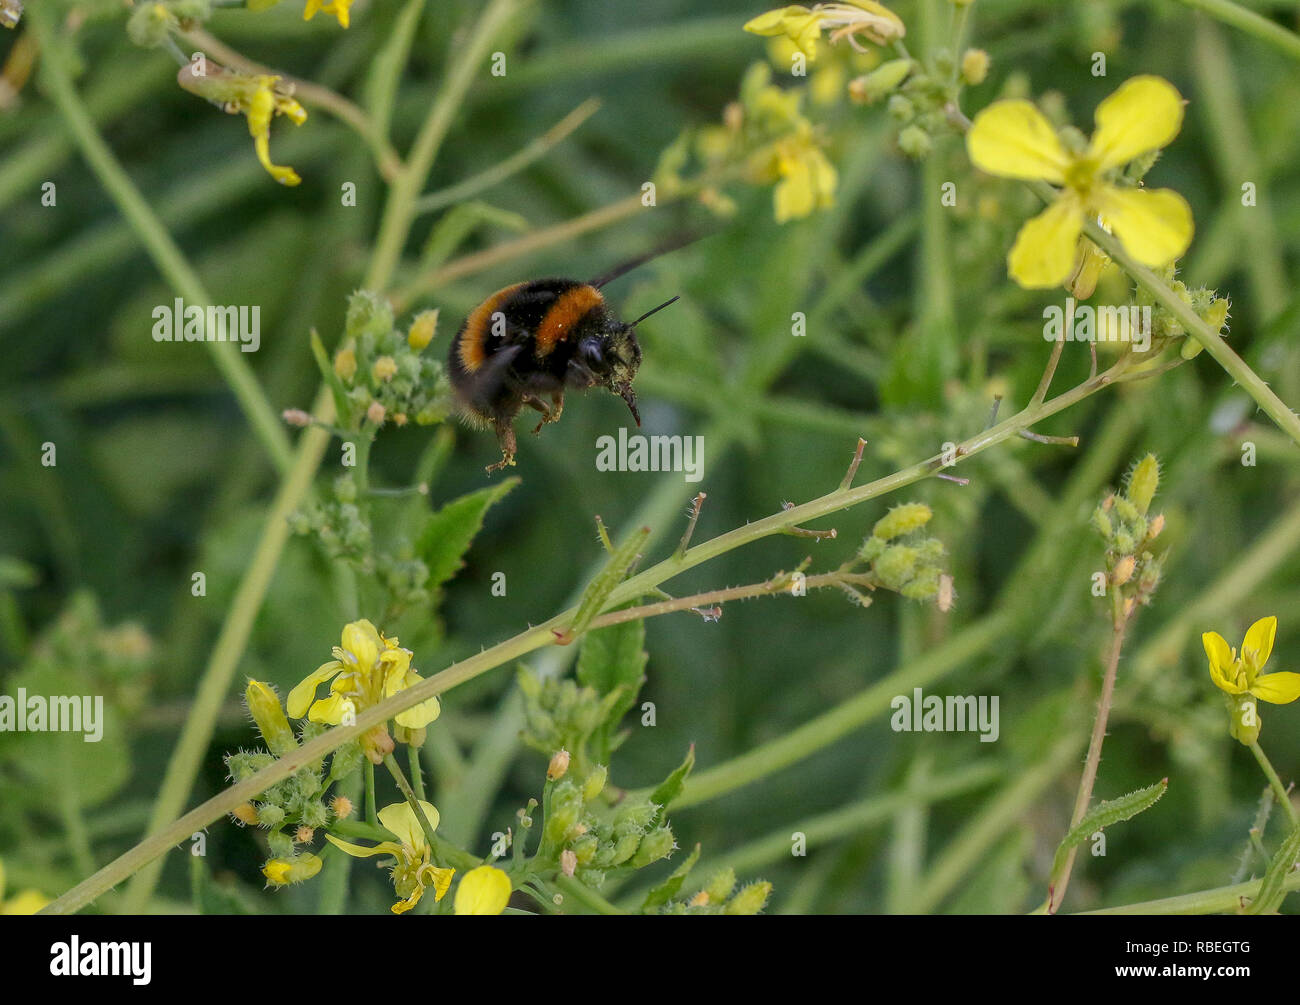 Bombus terrestris - a buff-tailed bumble bee in flight whilst gathering pollen. Pollen grains on bee head and proboscis. Stock Photo